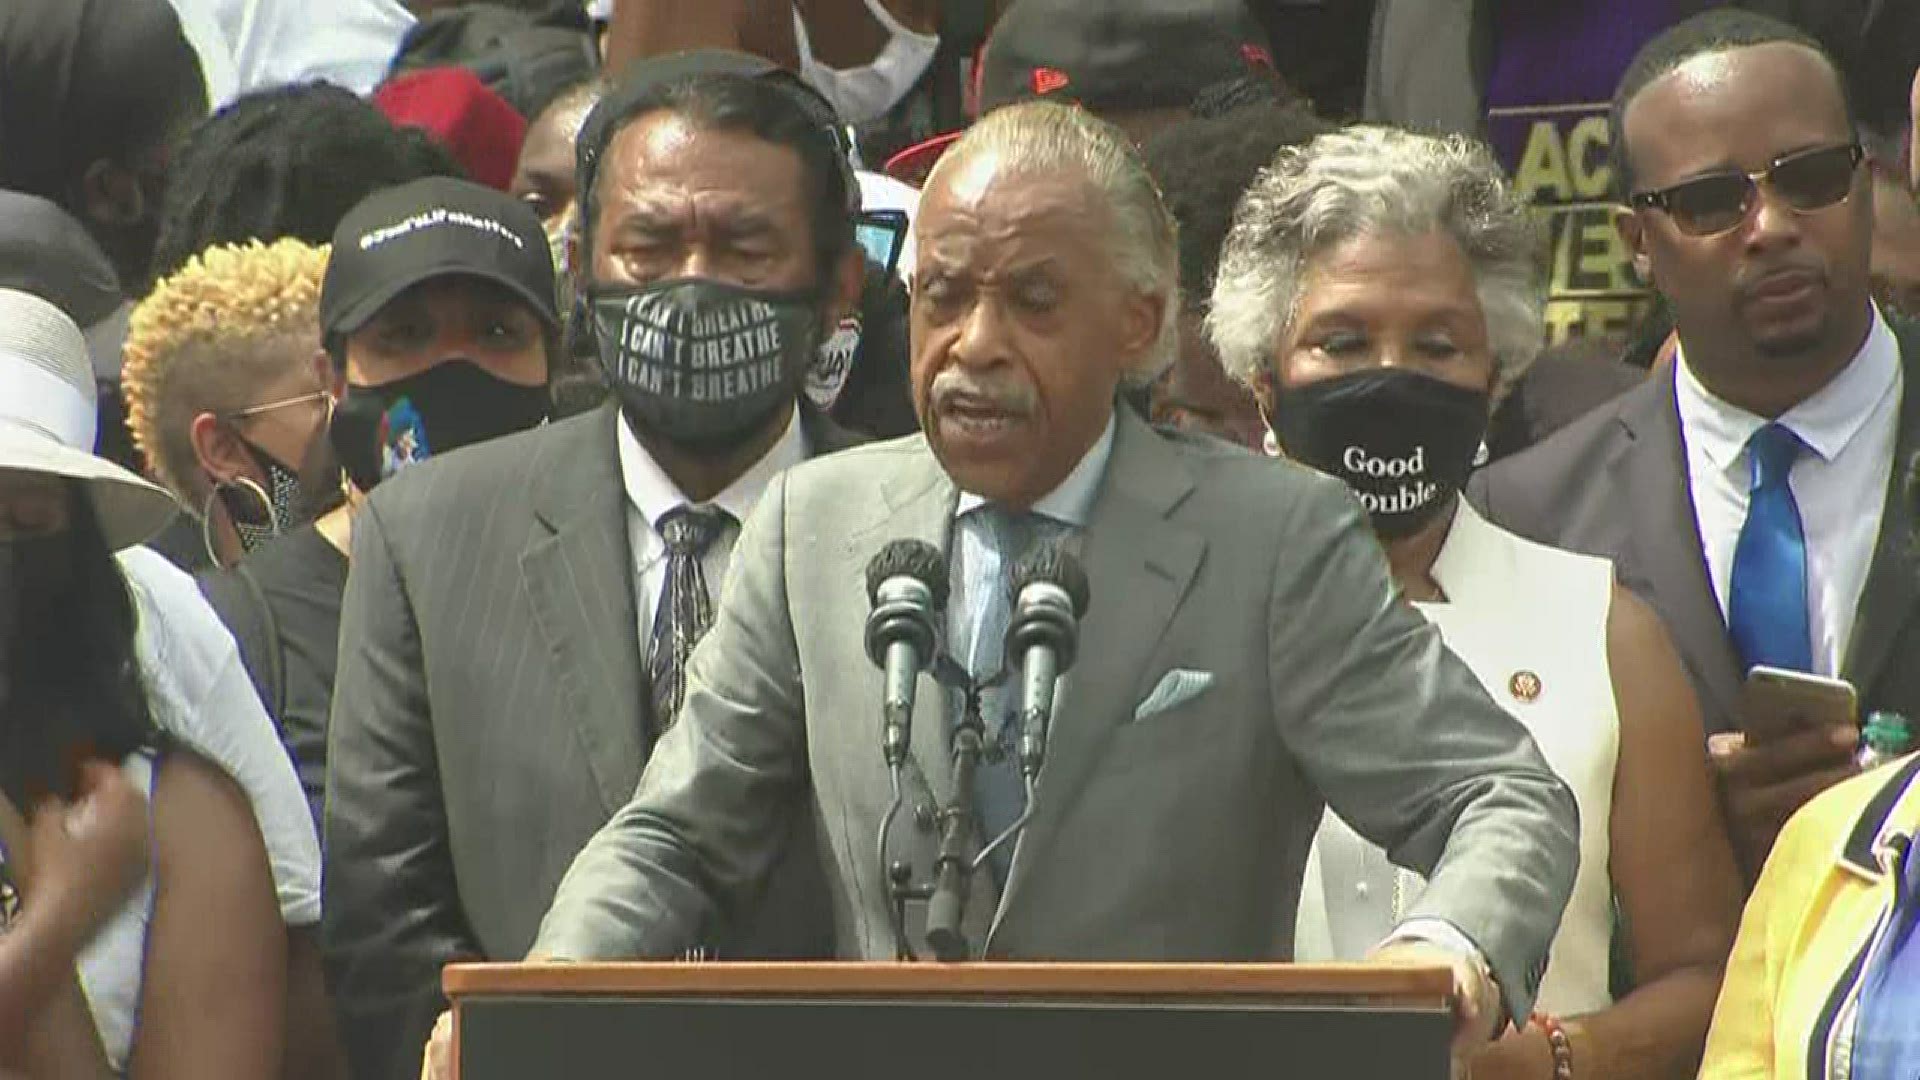 Rev. Al Sharpton encourages his audience to leave the March on Washington, committed to keeping the dream alive.